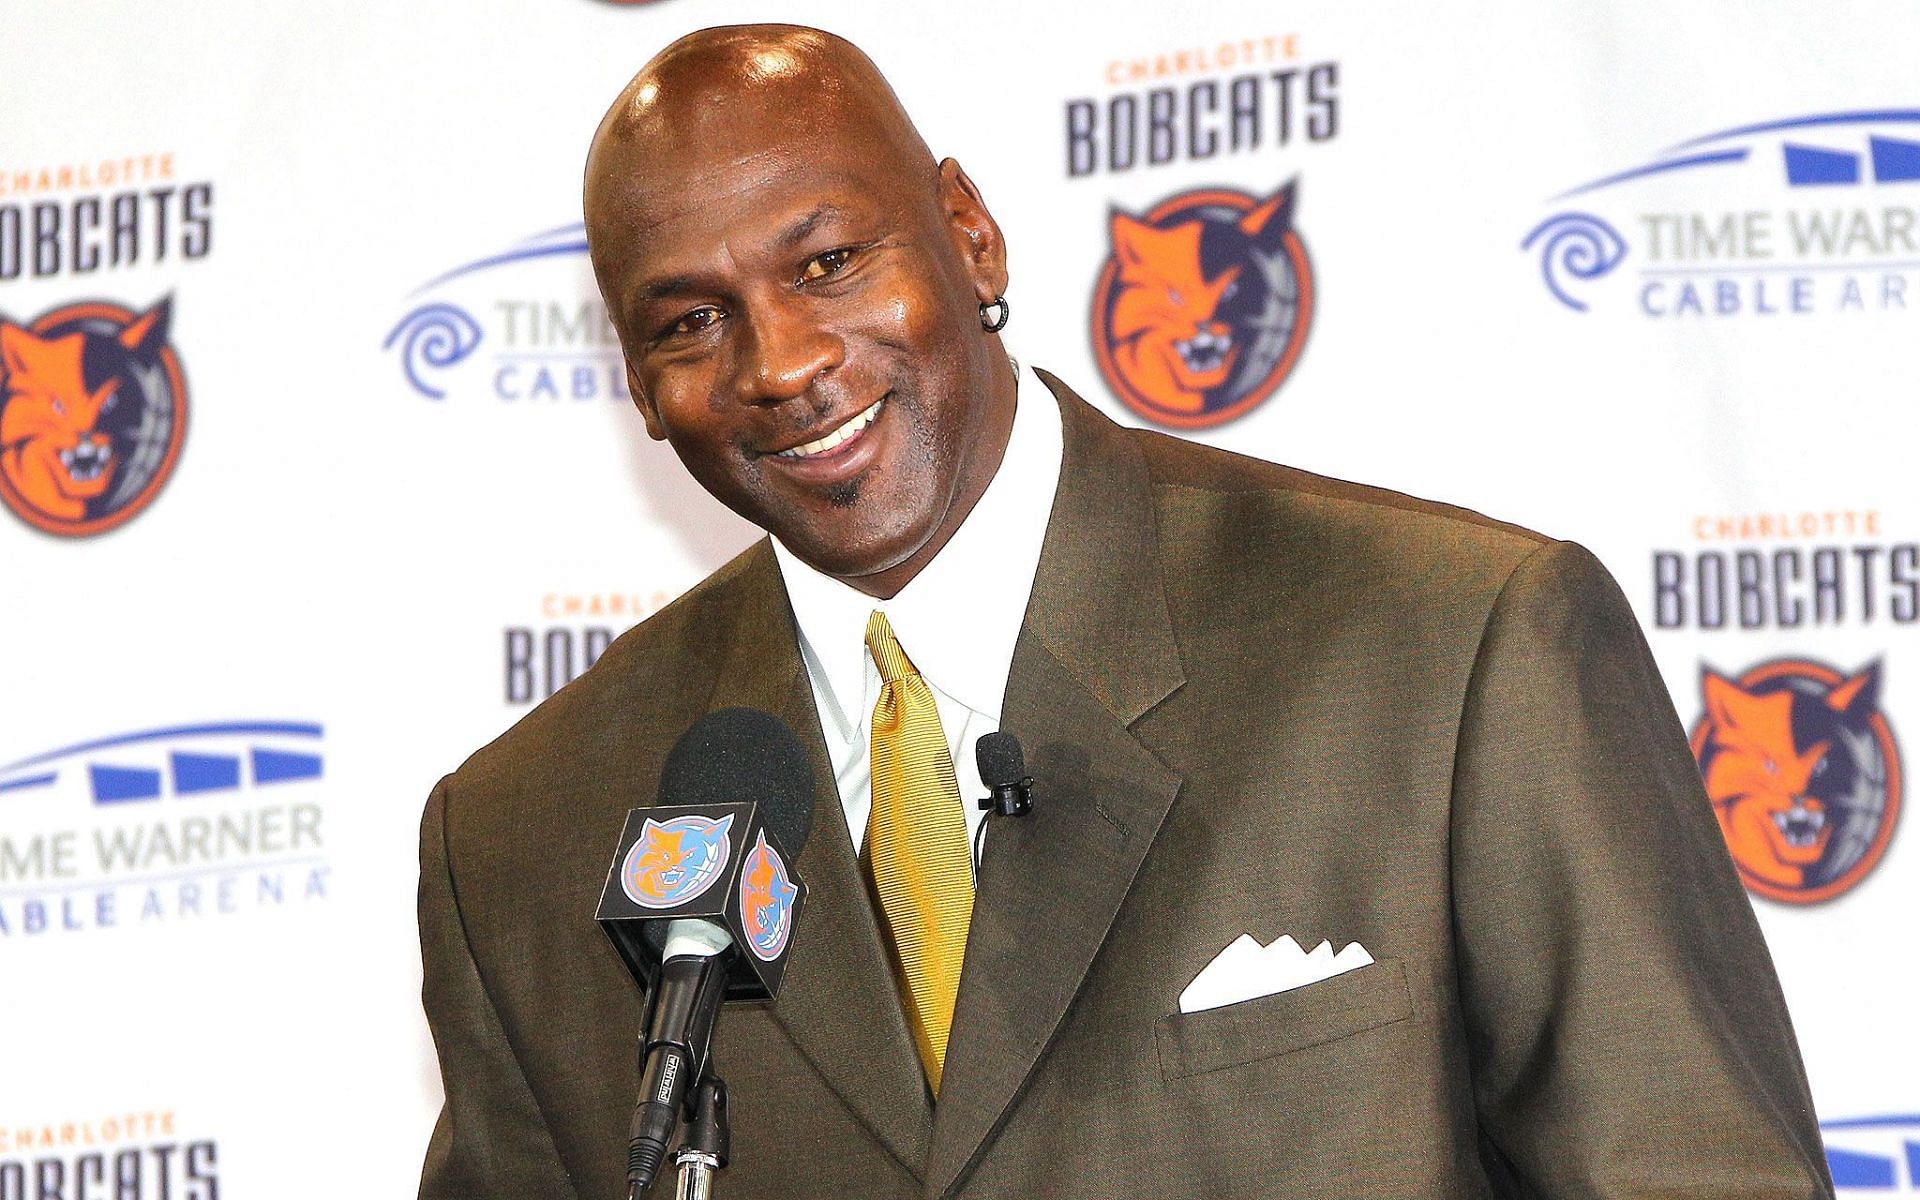 Michael Jordan started as a minority owner of the Charlotte Bobcats. (Photo: OpenCourt-Basketball)